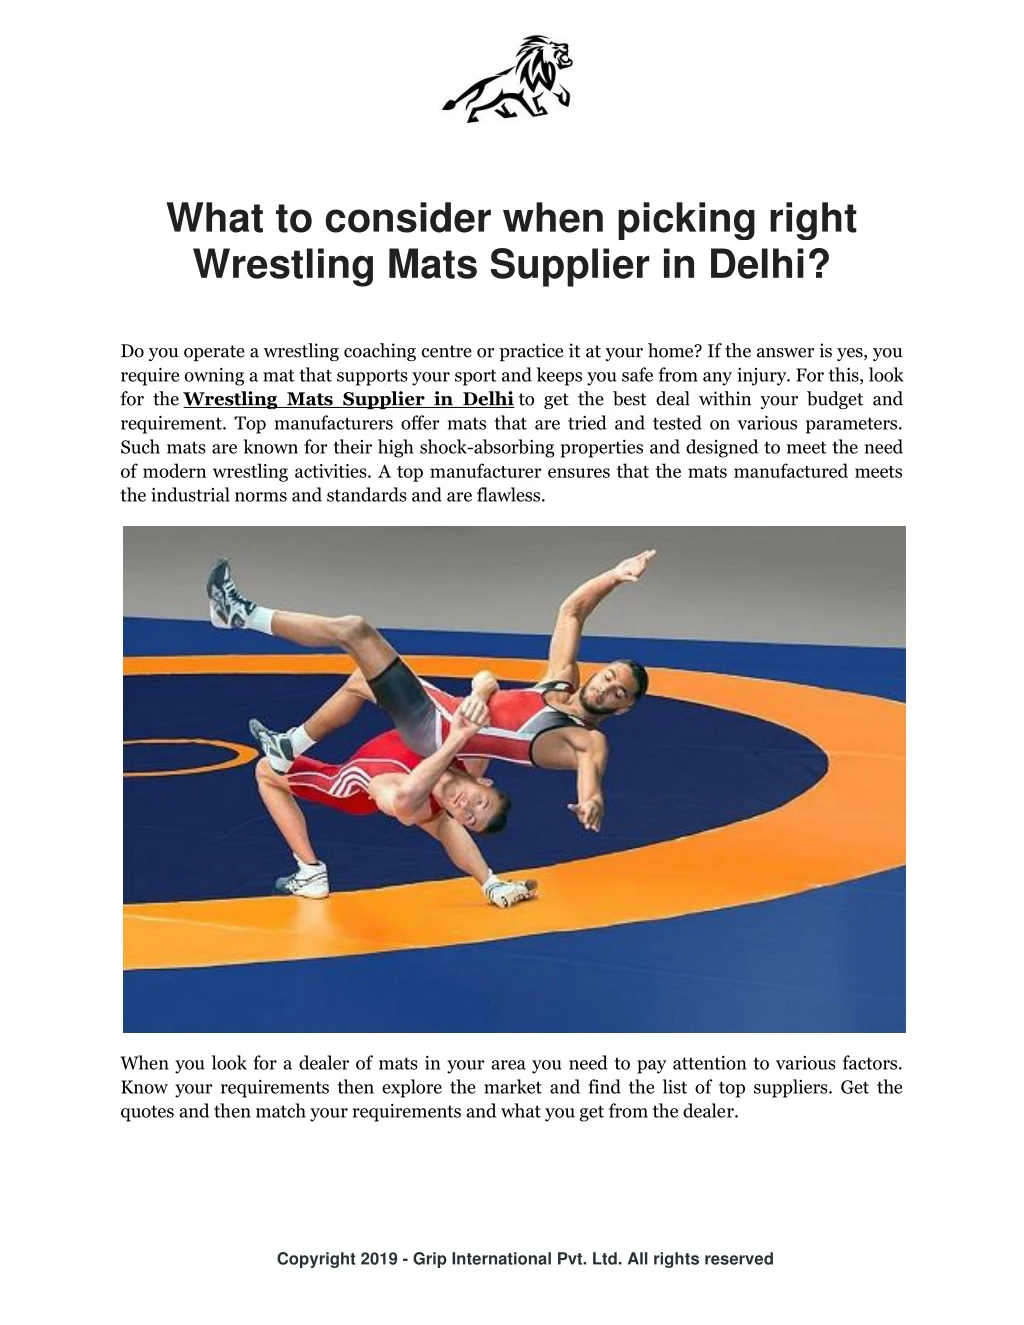 what to consider when picking right wrestling